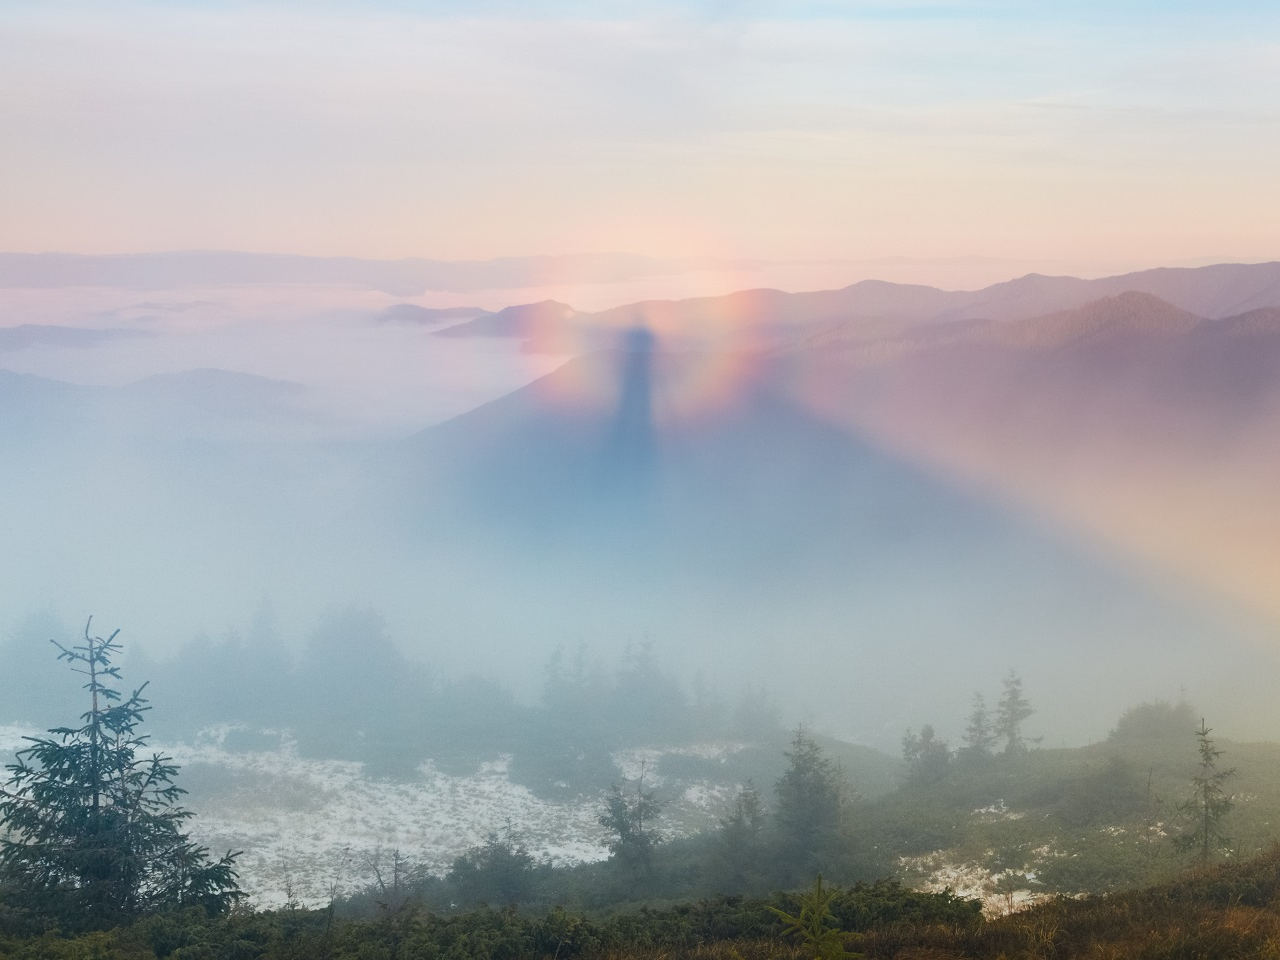 A brocken spectre, an optical illusion where an observer casts a shadow across the mist, giving the effect of a giant in the distance